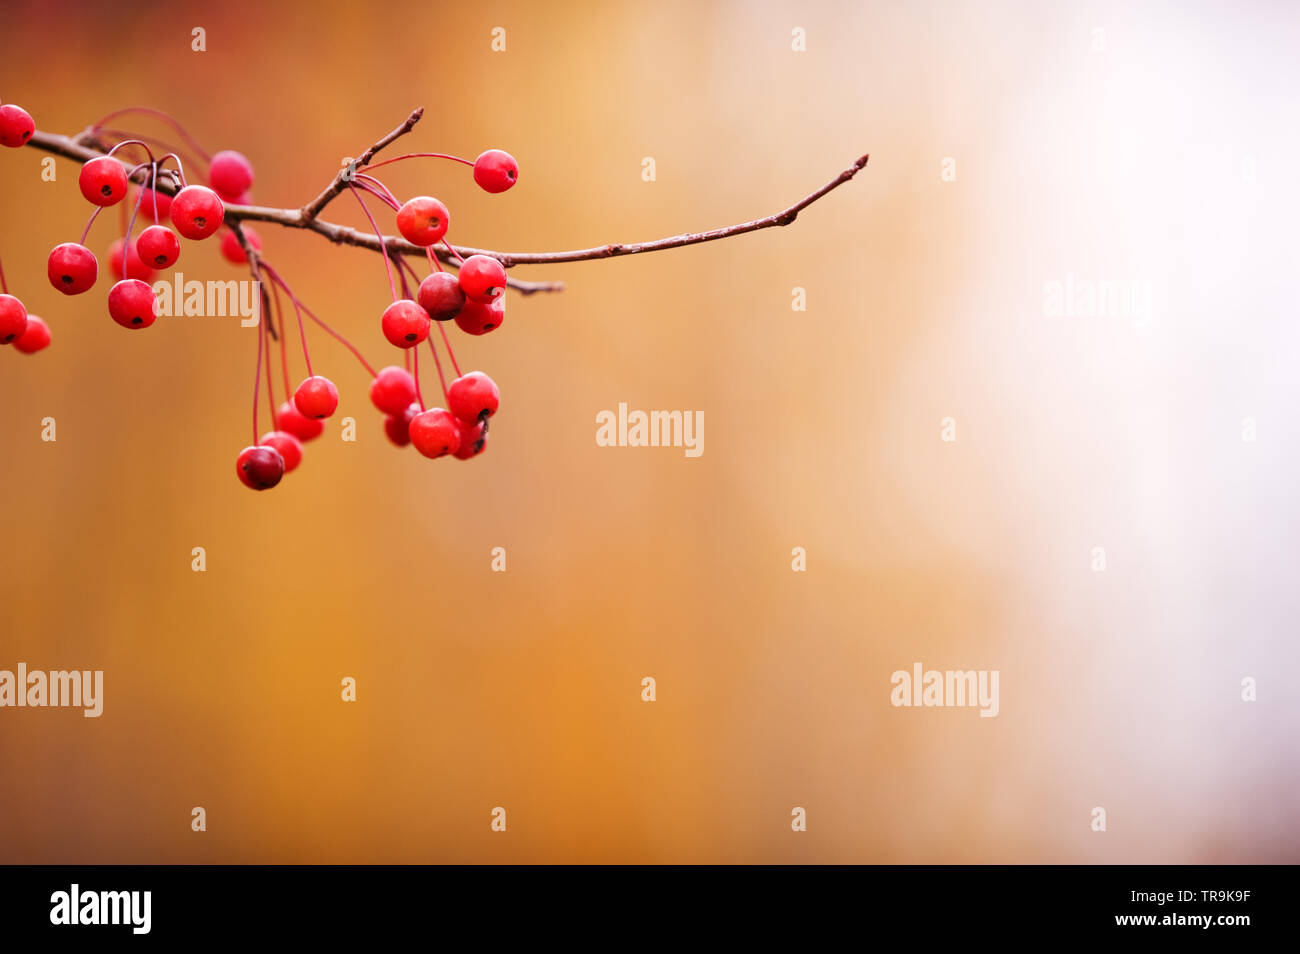 Siberian crab apple (Malus baccata) red berries hanging on branch. Stock Photo